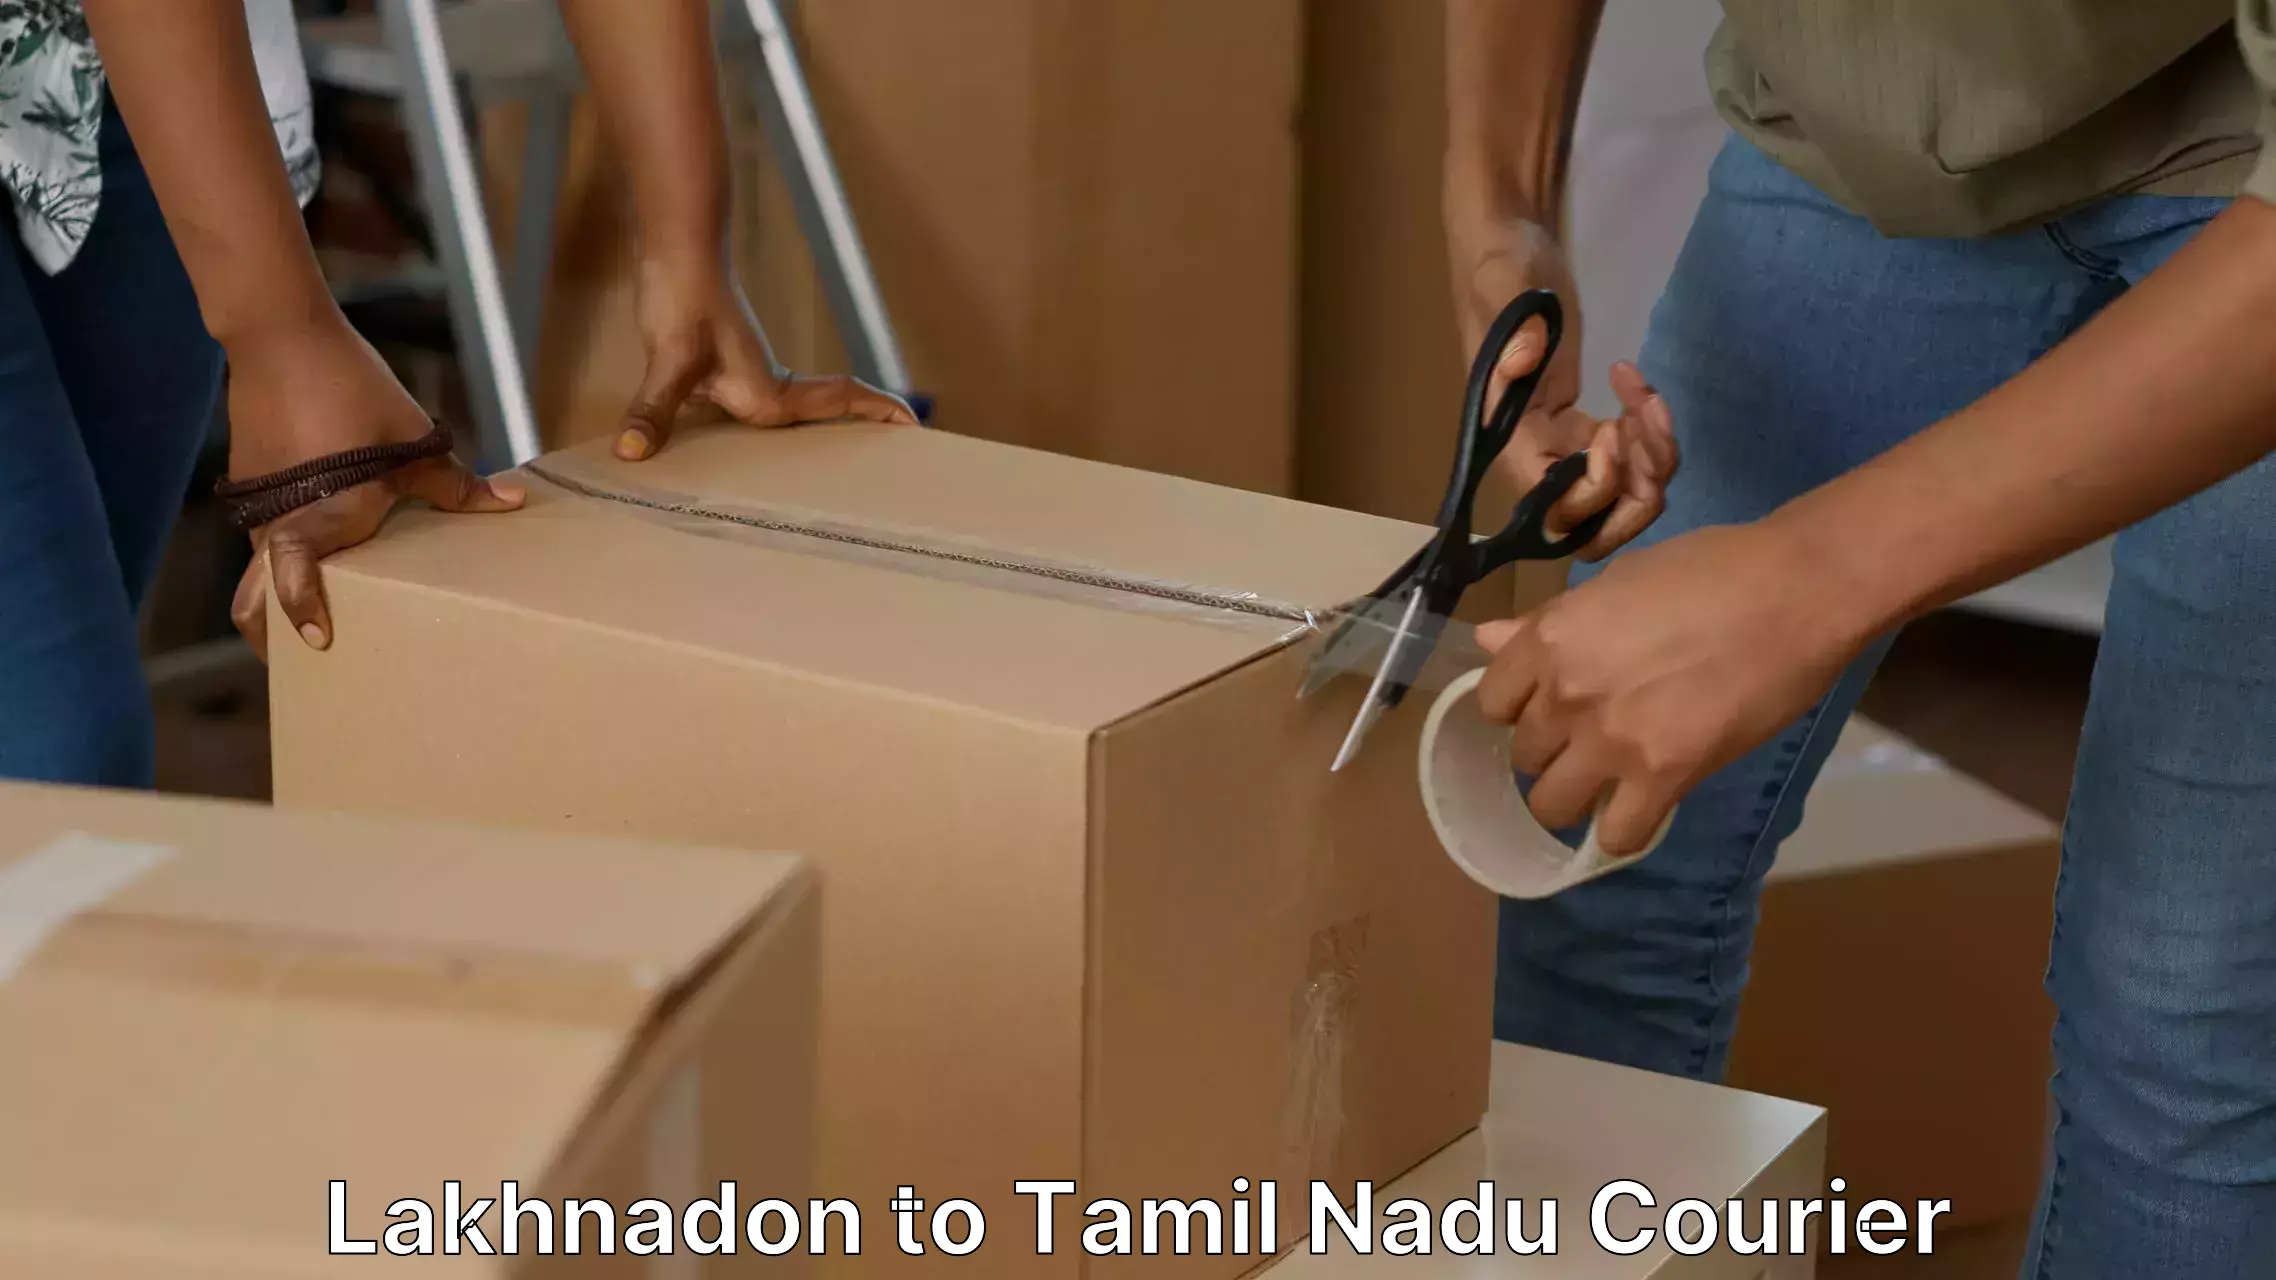 Moving and handling services Lakhnadon to Chennai Port